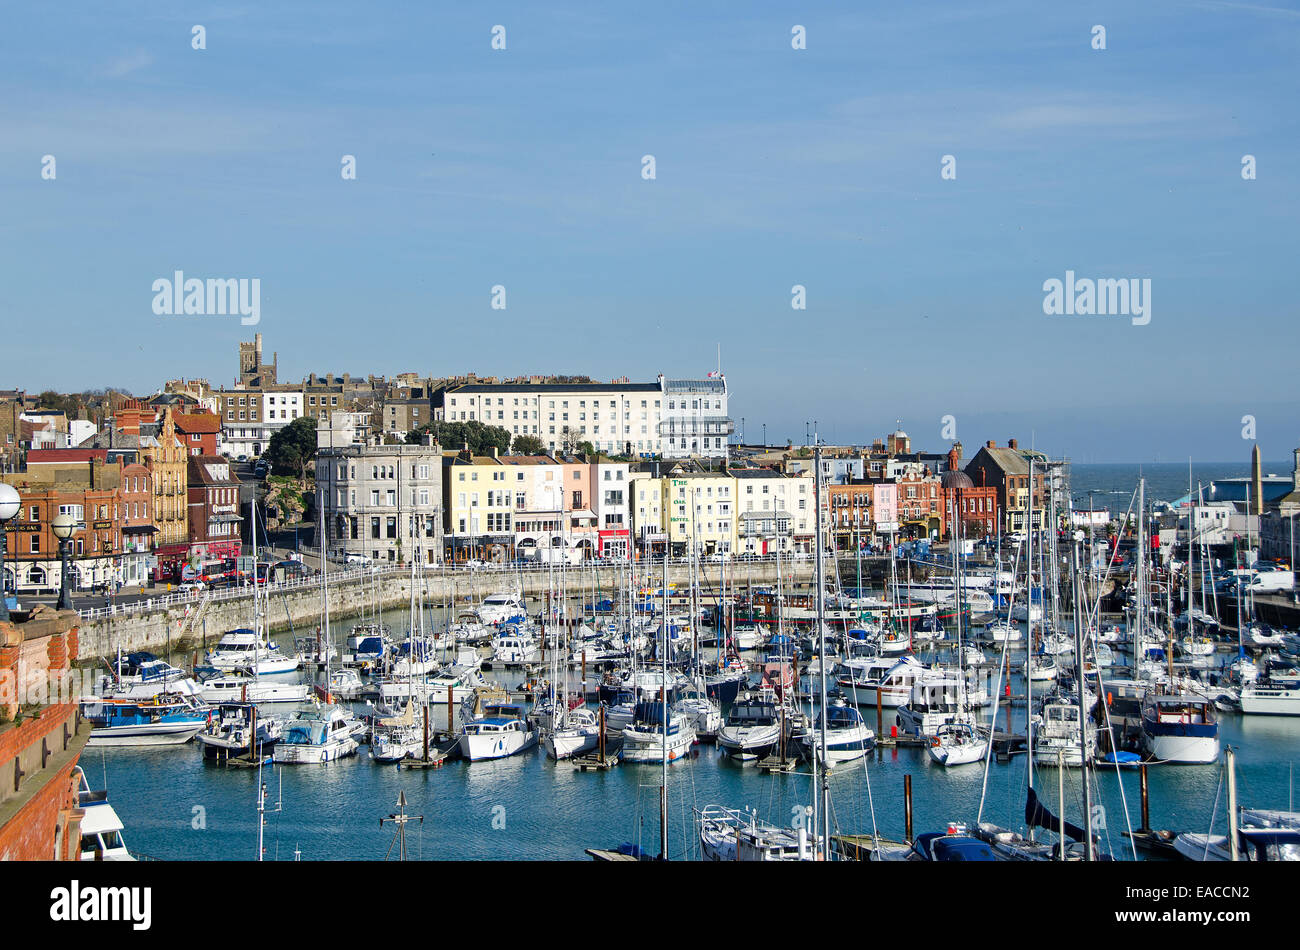 The Royal Harbour at Ramsgate, Kent, UK from an elevated position. Stock Photo